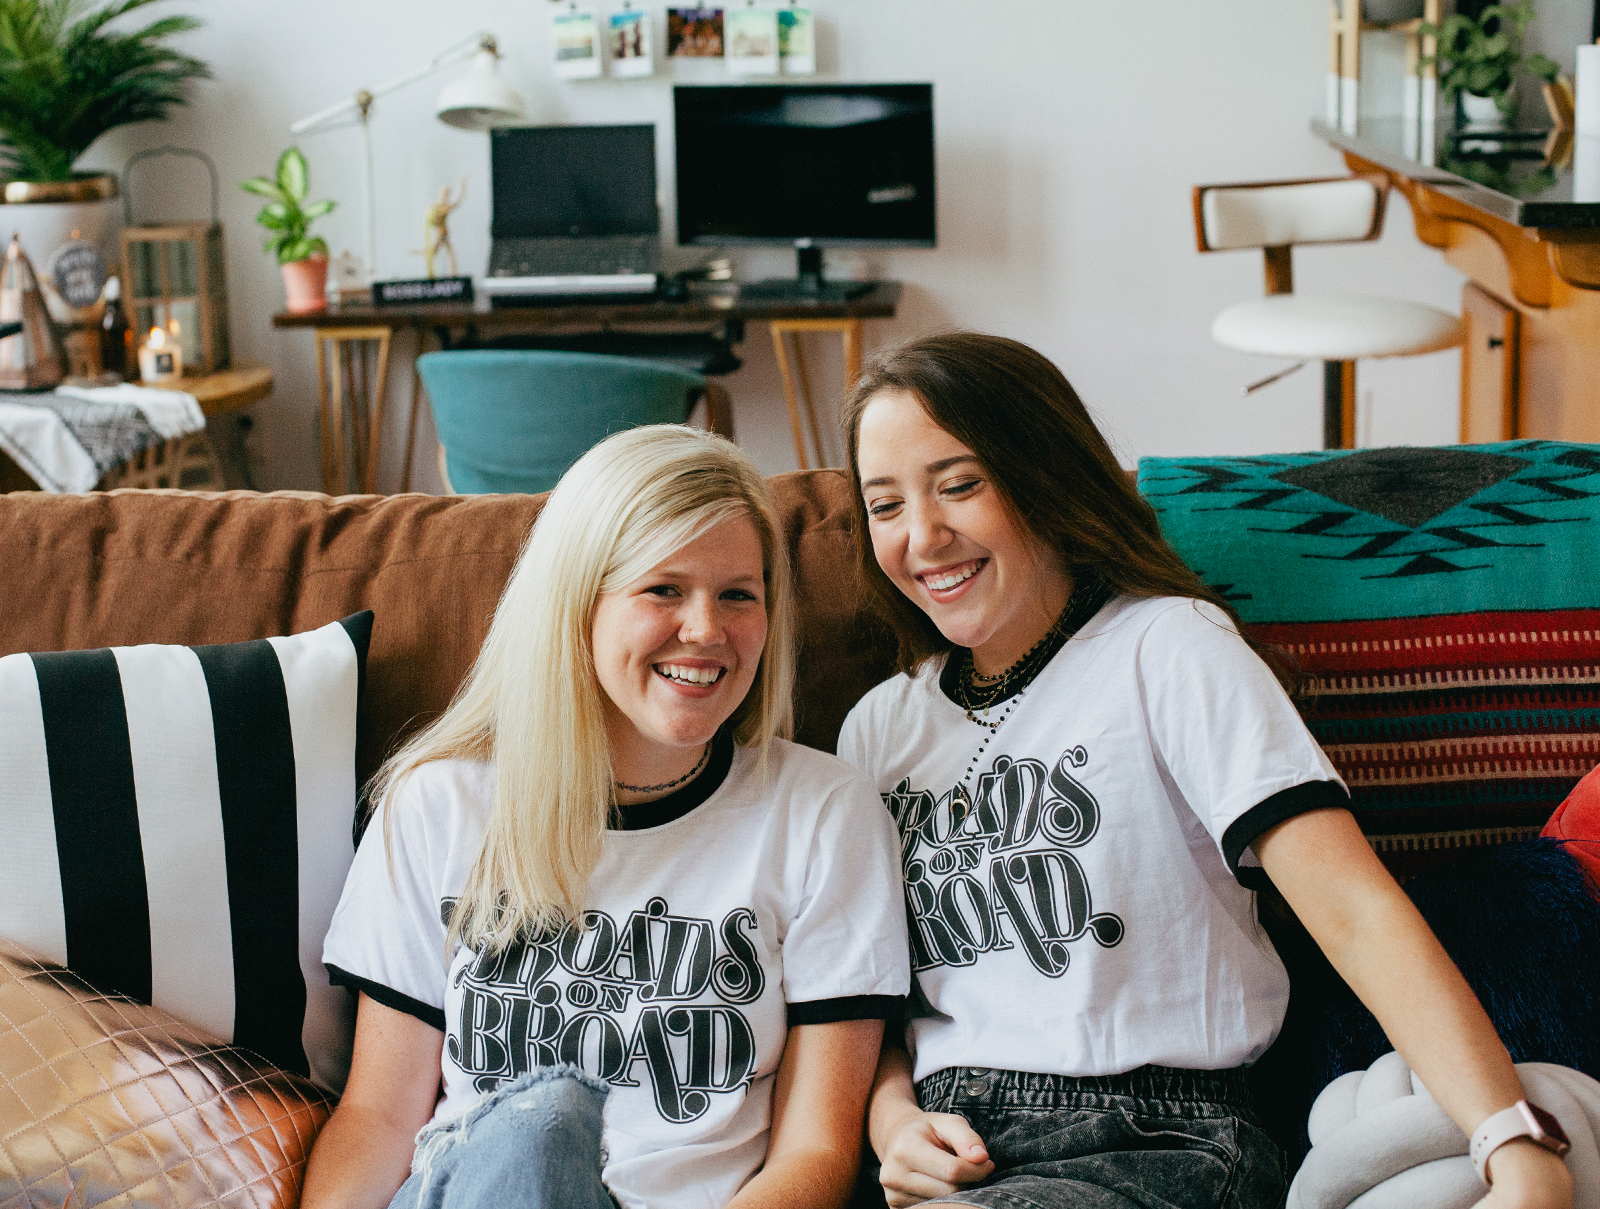 Two women sitting on a couch and wearing Broads on Broad shirts